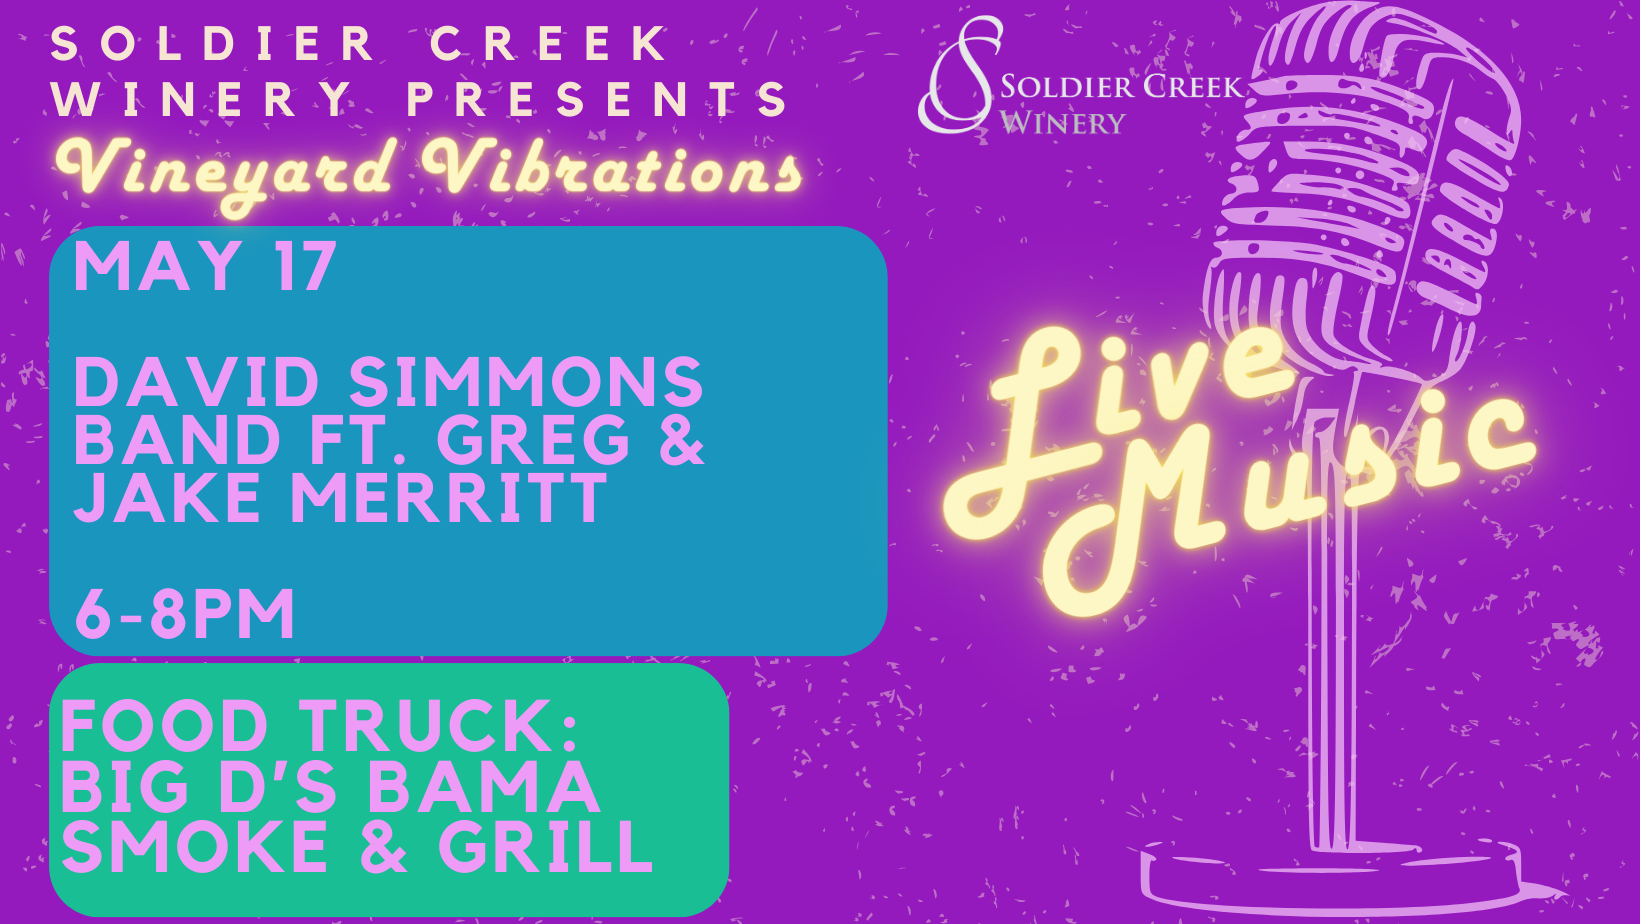 free live music every friday at solider creek winery. friday may 10 is david simmons band featuring greg and jake merritt from 6-8pm. food truck is big d's bama smoke and grill